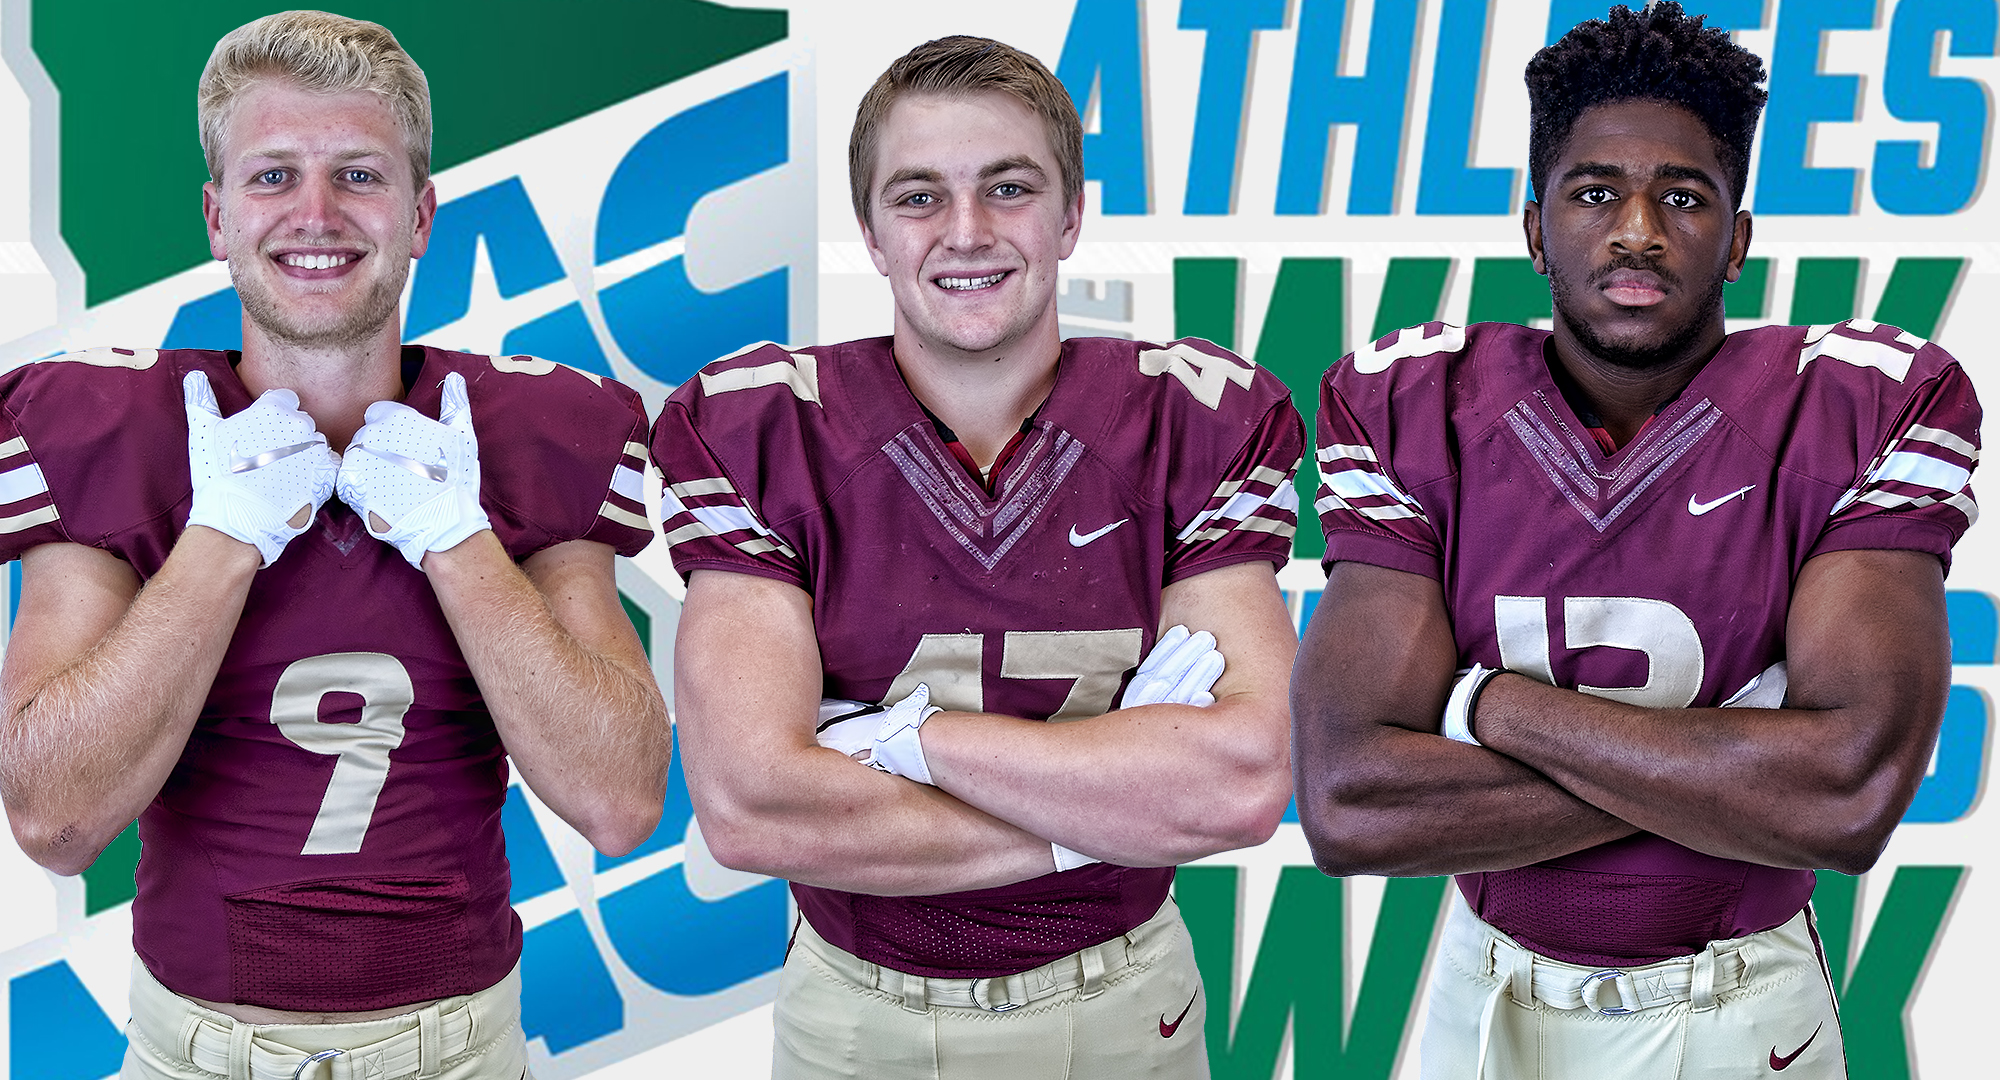 Matt Bye, Sam Michel and Willie Julkes all earned MIAC Player of the Week honors after the Cobbers' win over #4 St. John's.